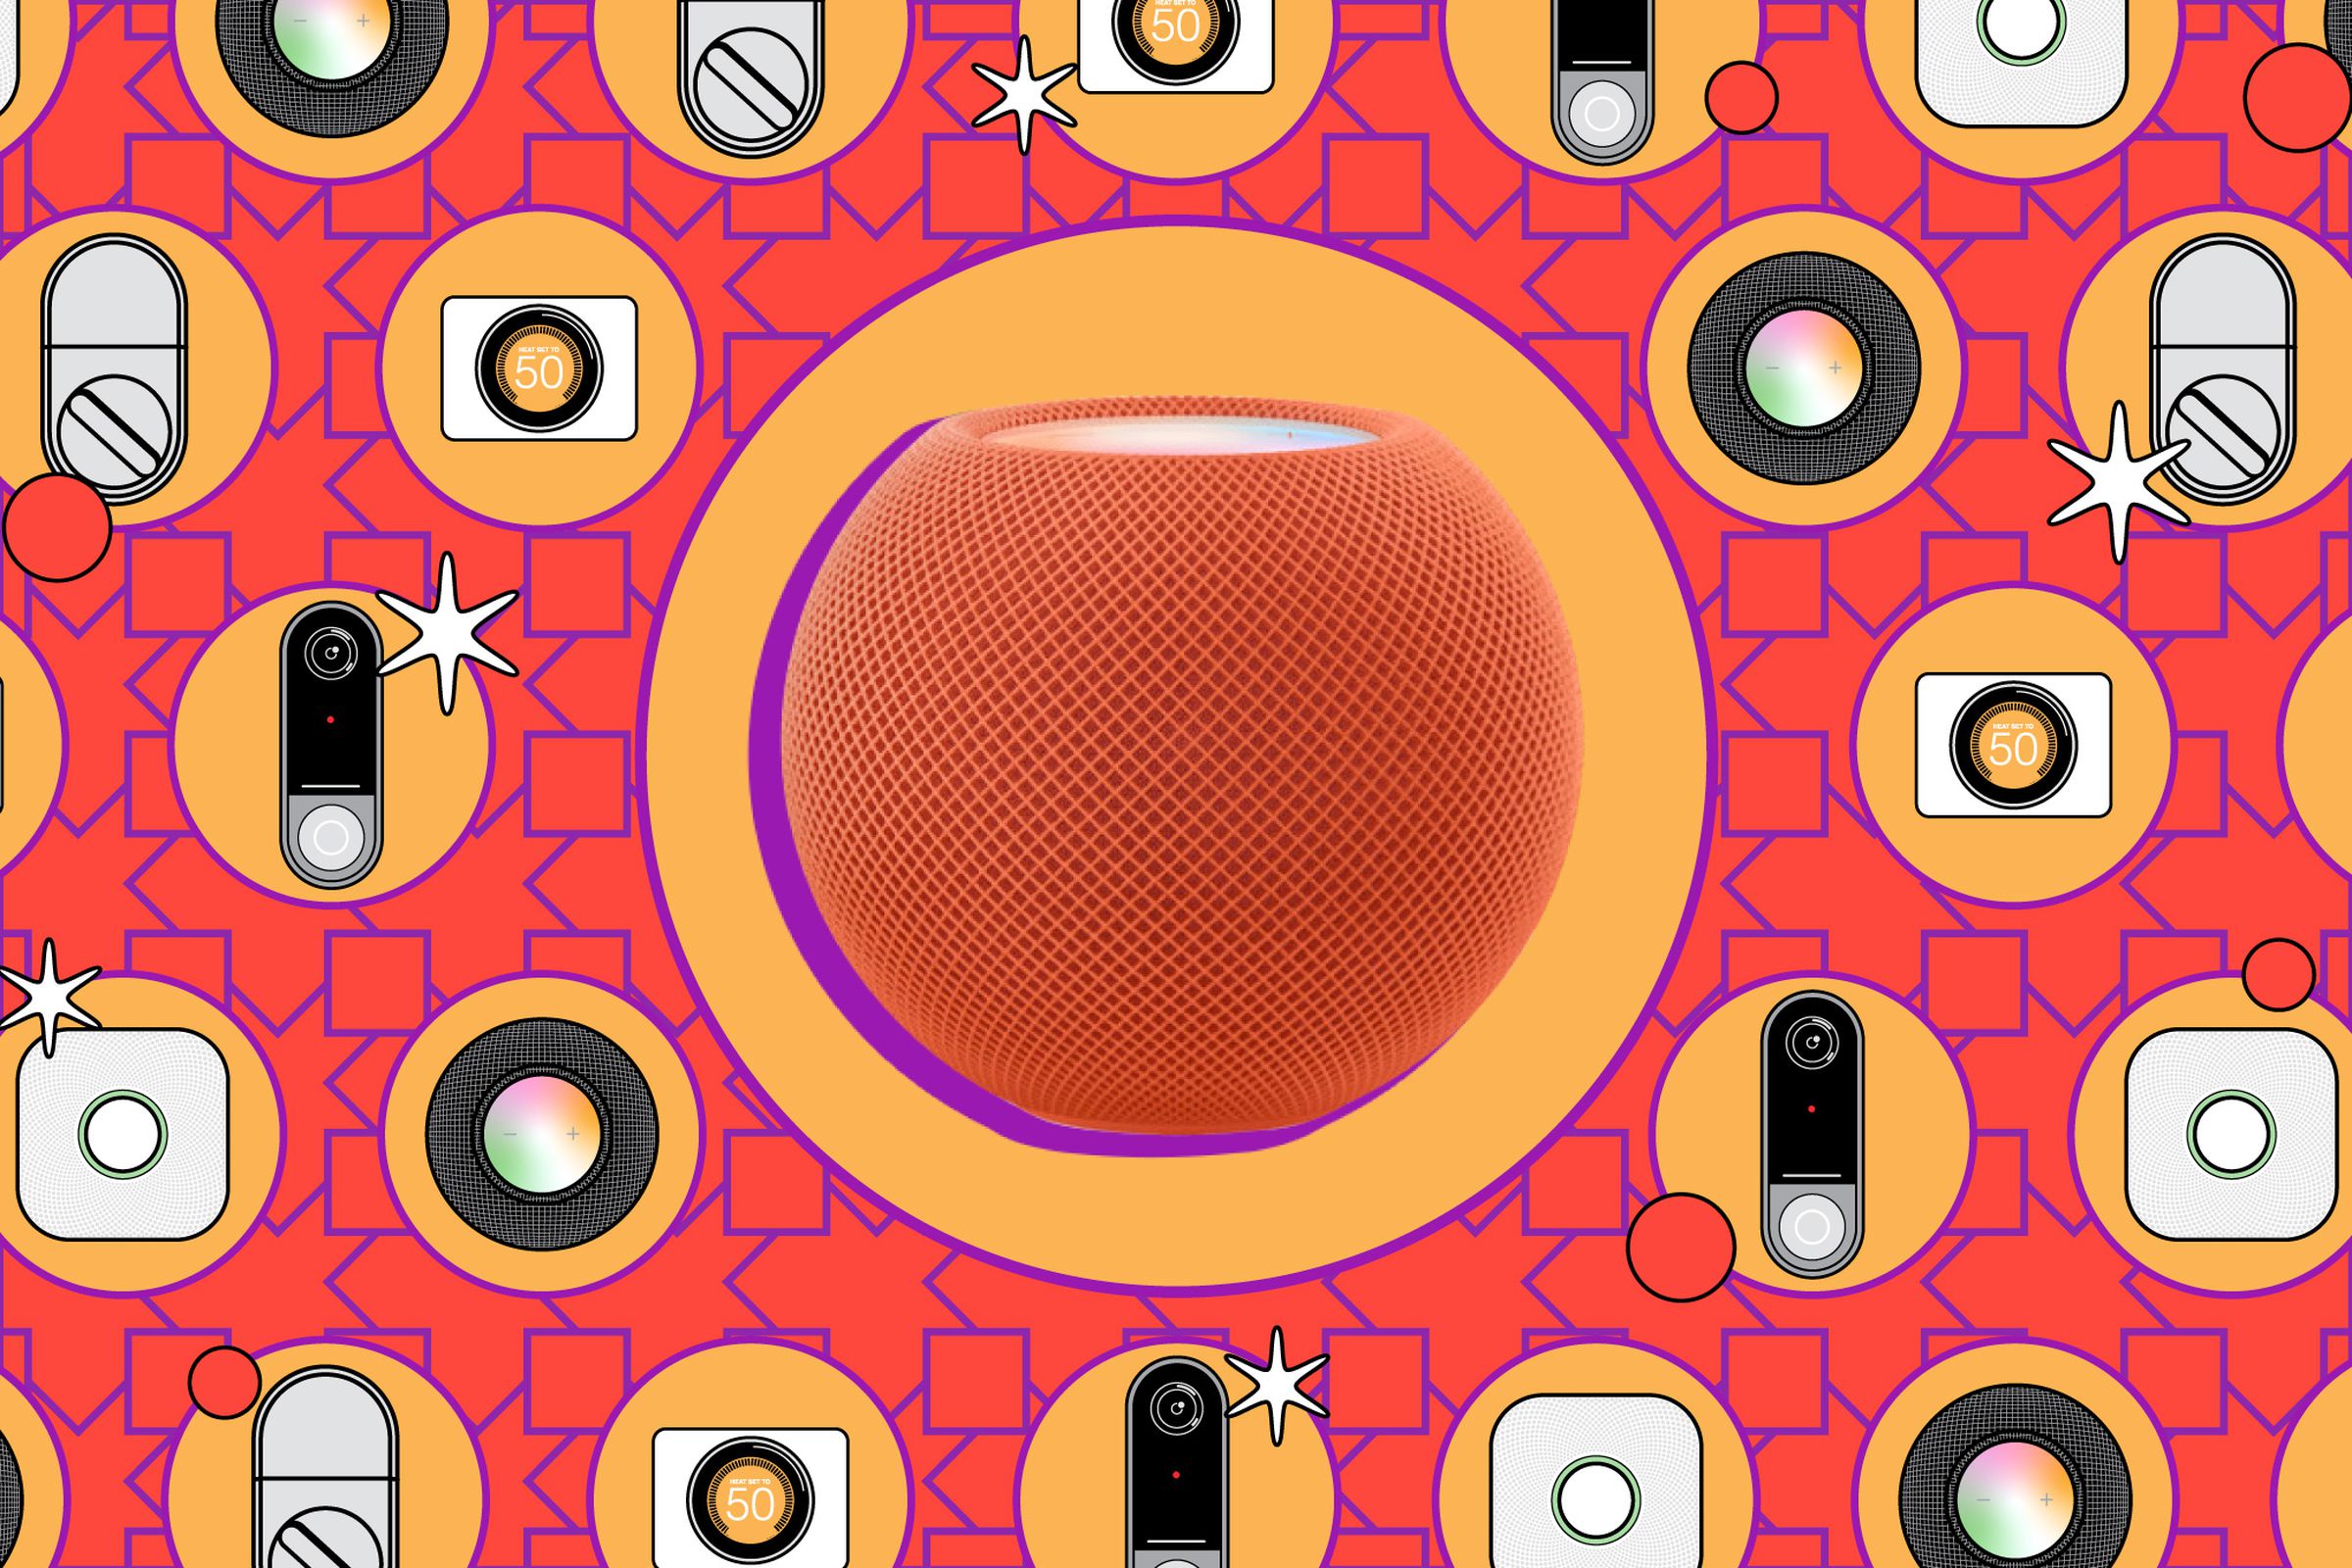 HomePod Mini with a background of small illustrations.